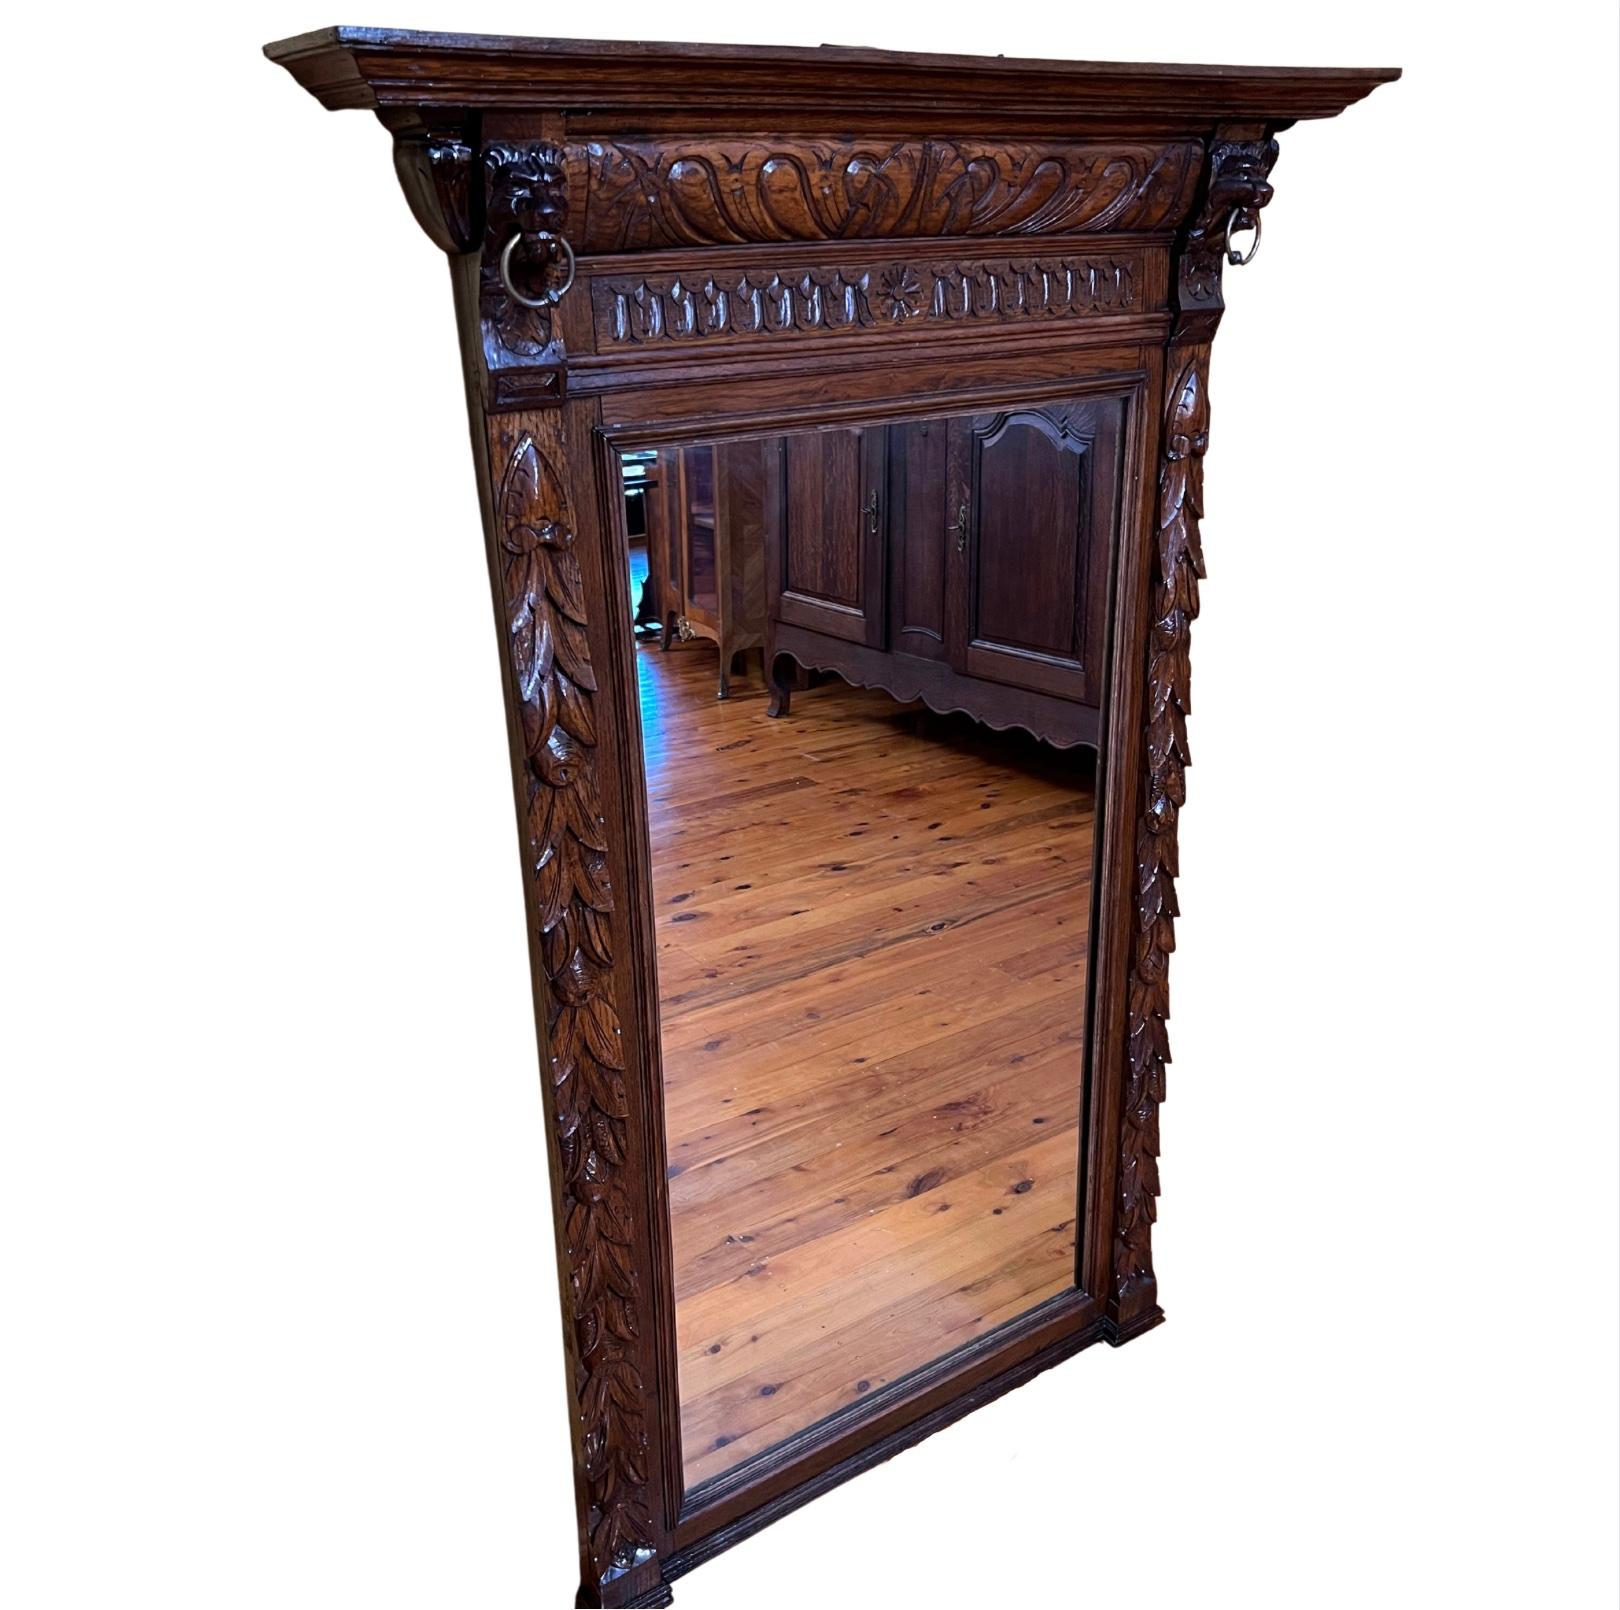 Large mirror with carved throughout with two lion heads with rings on top sides, has a small ledge on top of frame, has wire behind to hang on wall. 

Circa: 19th Century

Material: Oak

Country of Origin: France

Measurements: 148cm high,